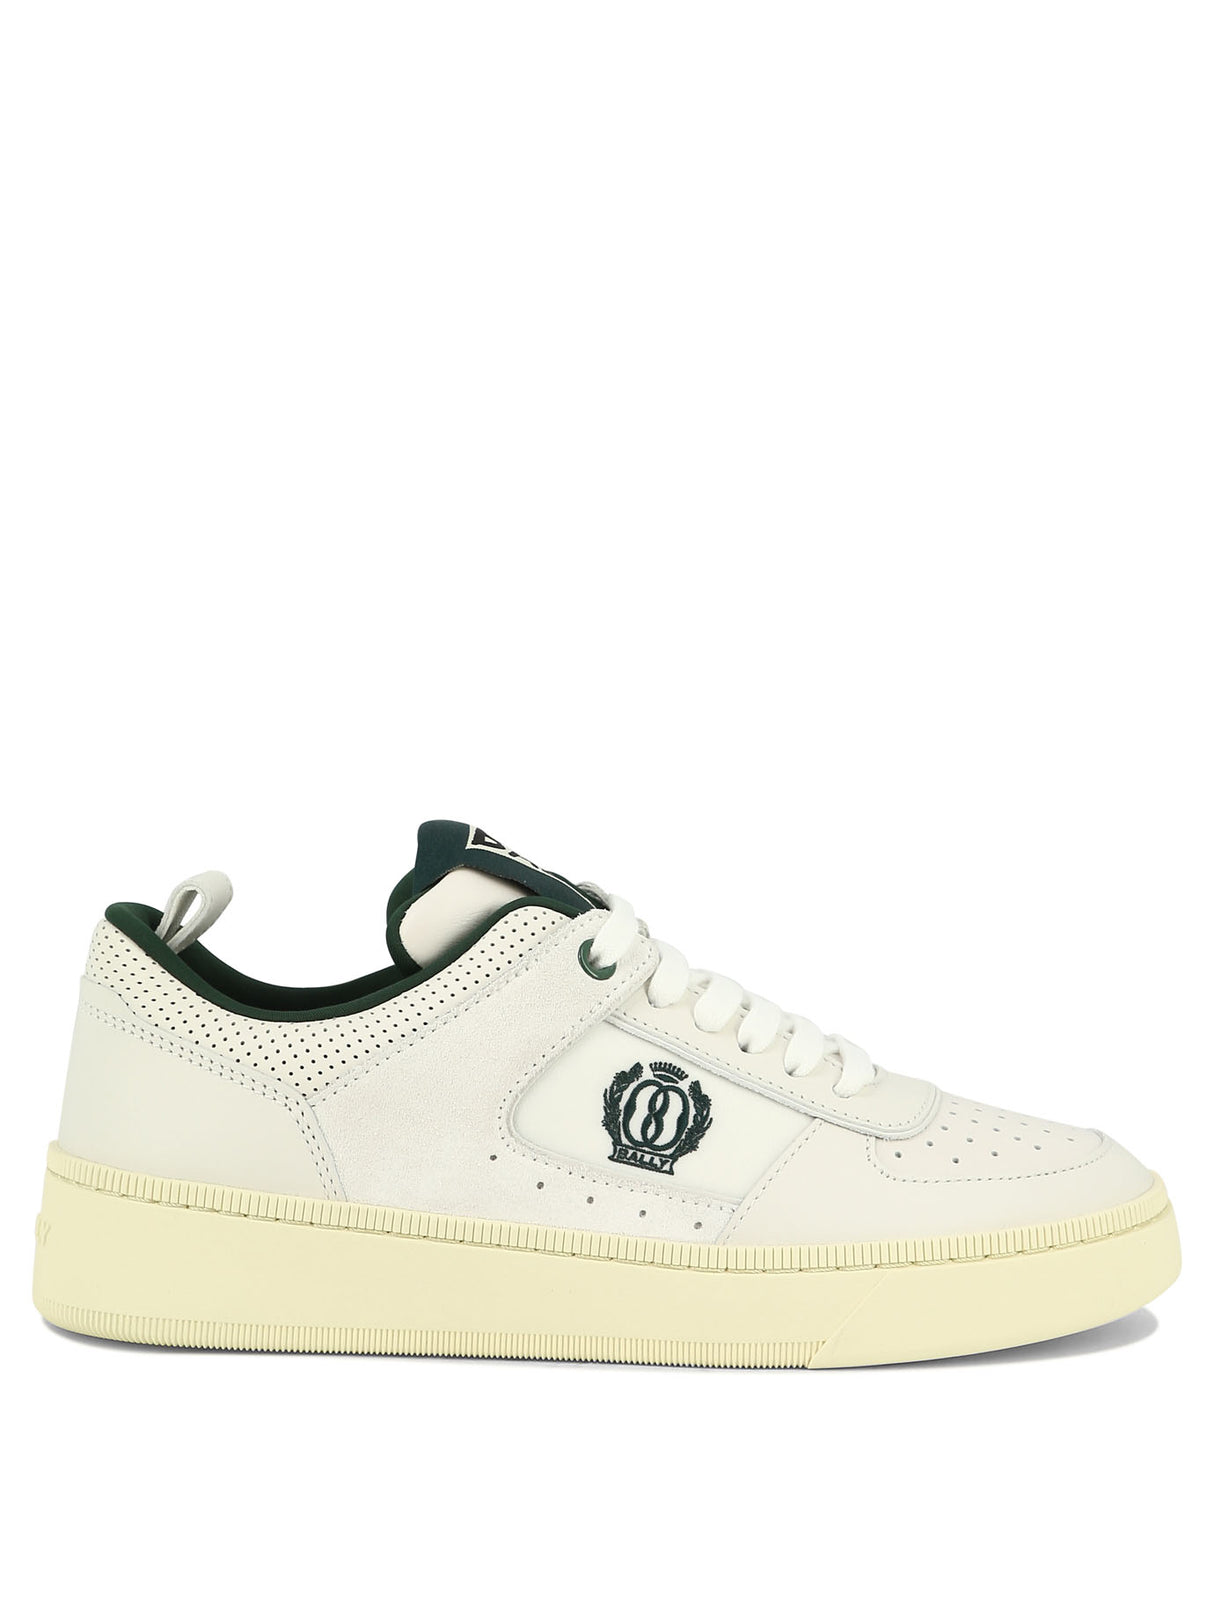 BALLY White Leather Sneakers for Women